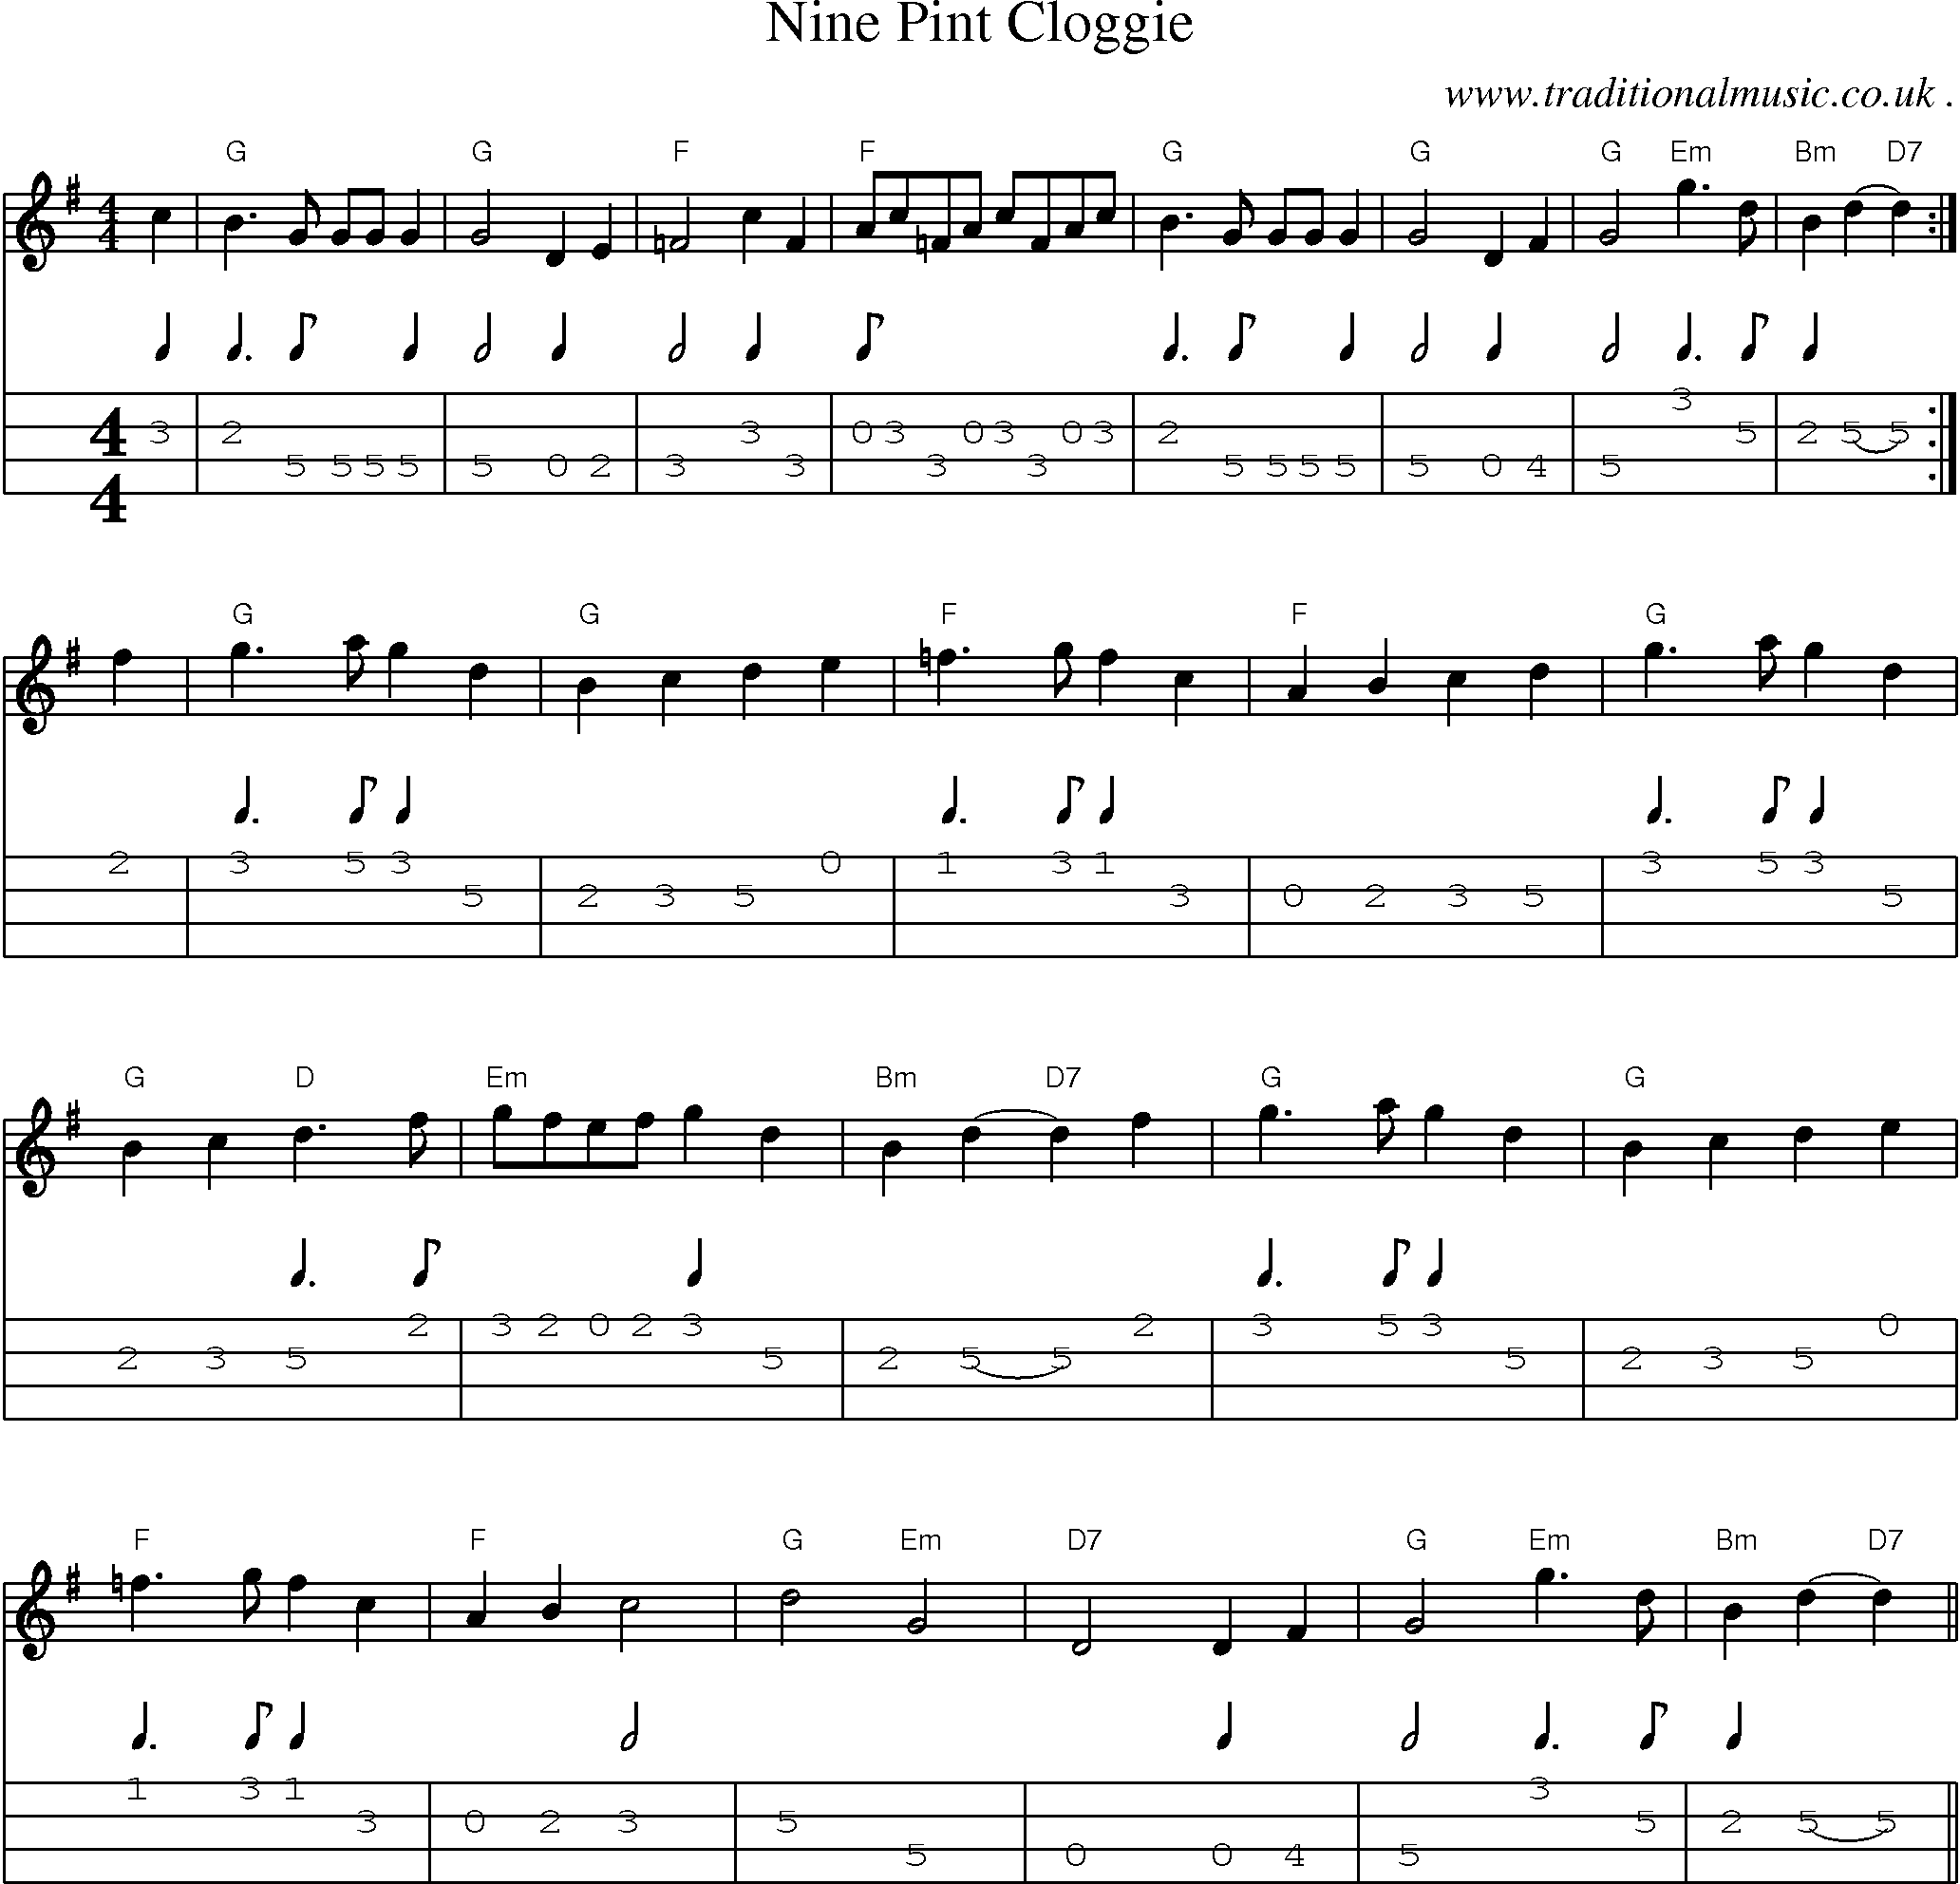 Sheet-Music and Mandolin Tabs for Nine Pint Cloggie